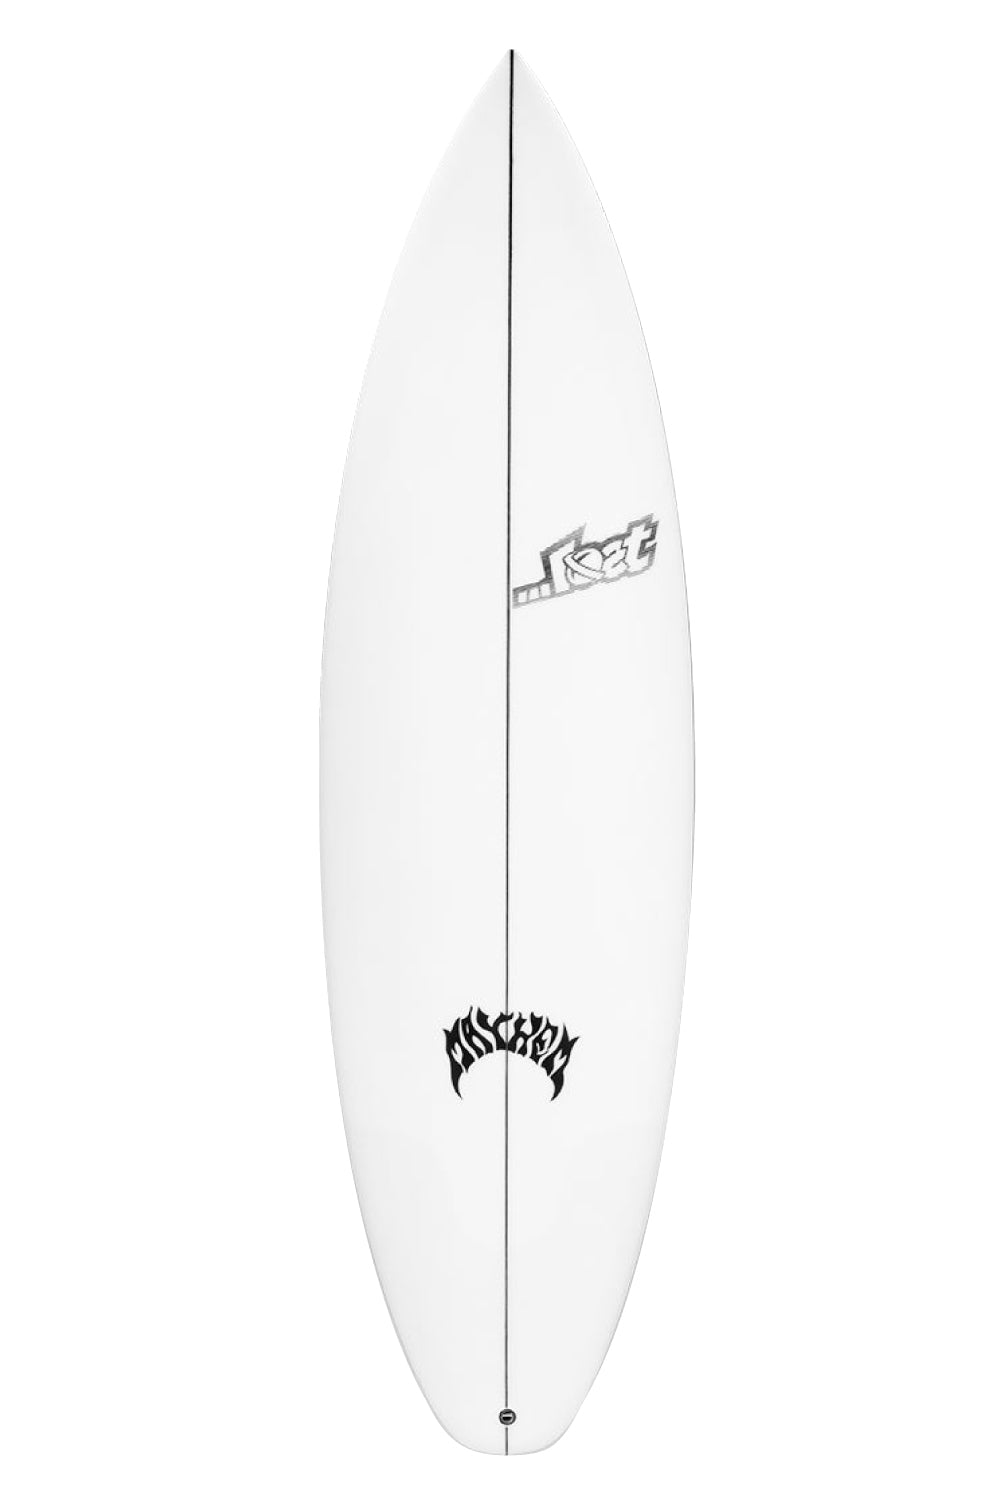 Lost Surfboards Driver 3.0 Squash Tail Surfboard